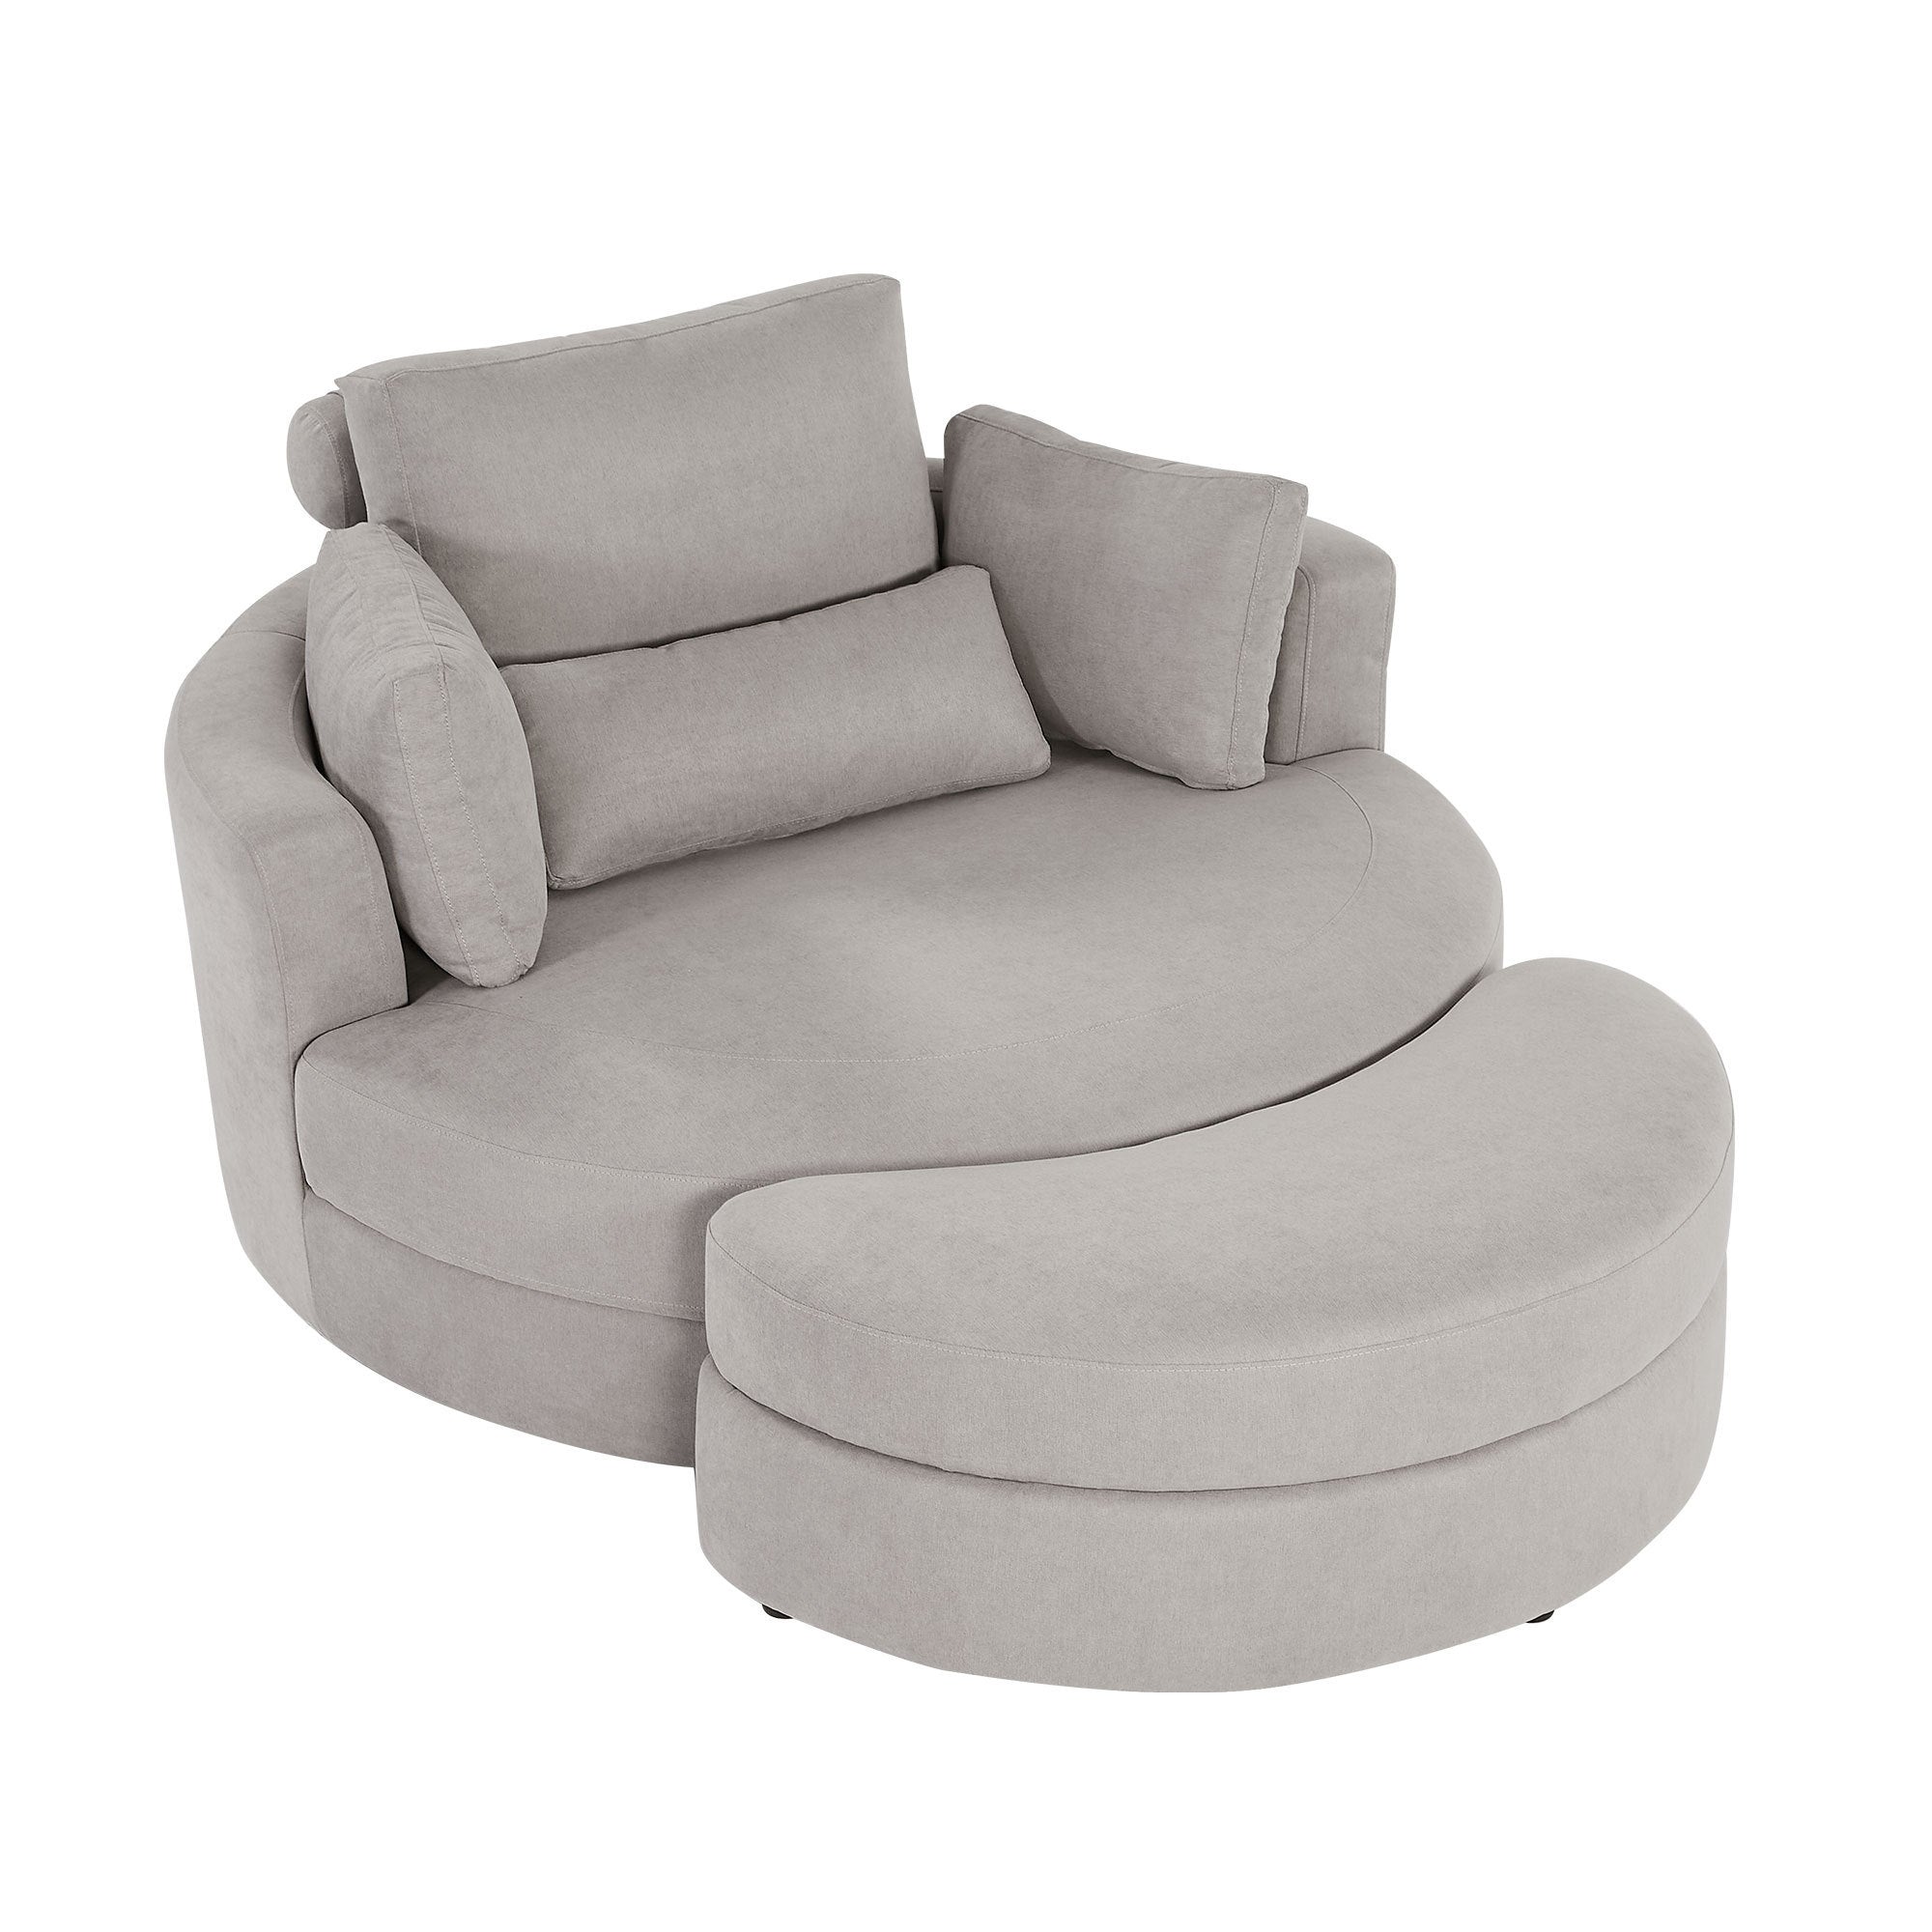 Linen Fabric Swivel Accent Barrel Big Round Lounge Sofa Chair with Storage Ottoman and Pillows (Gray)